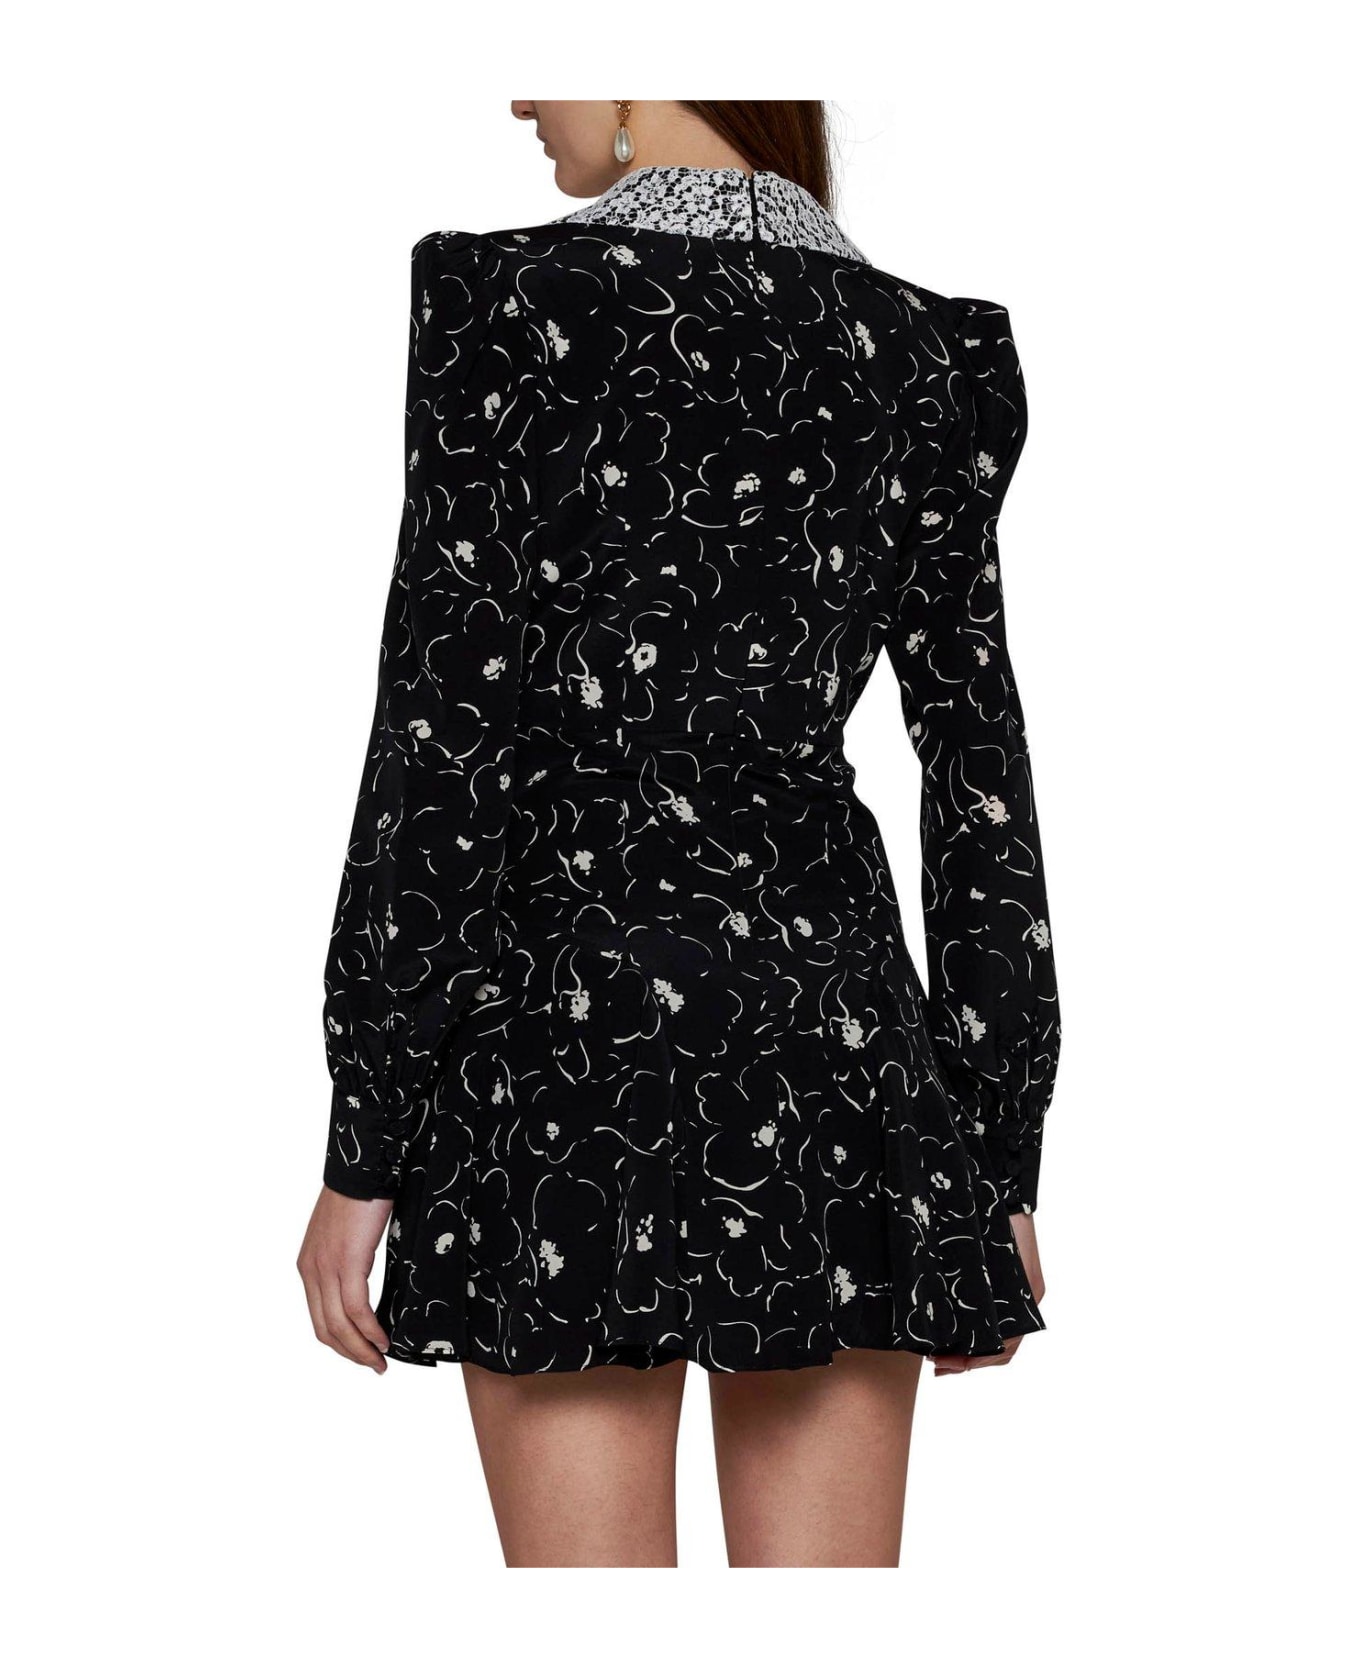 Alessandra Rich Bow Embellished Floral Printed Mini Dress - BLACK/NEUTRALS ブラウス